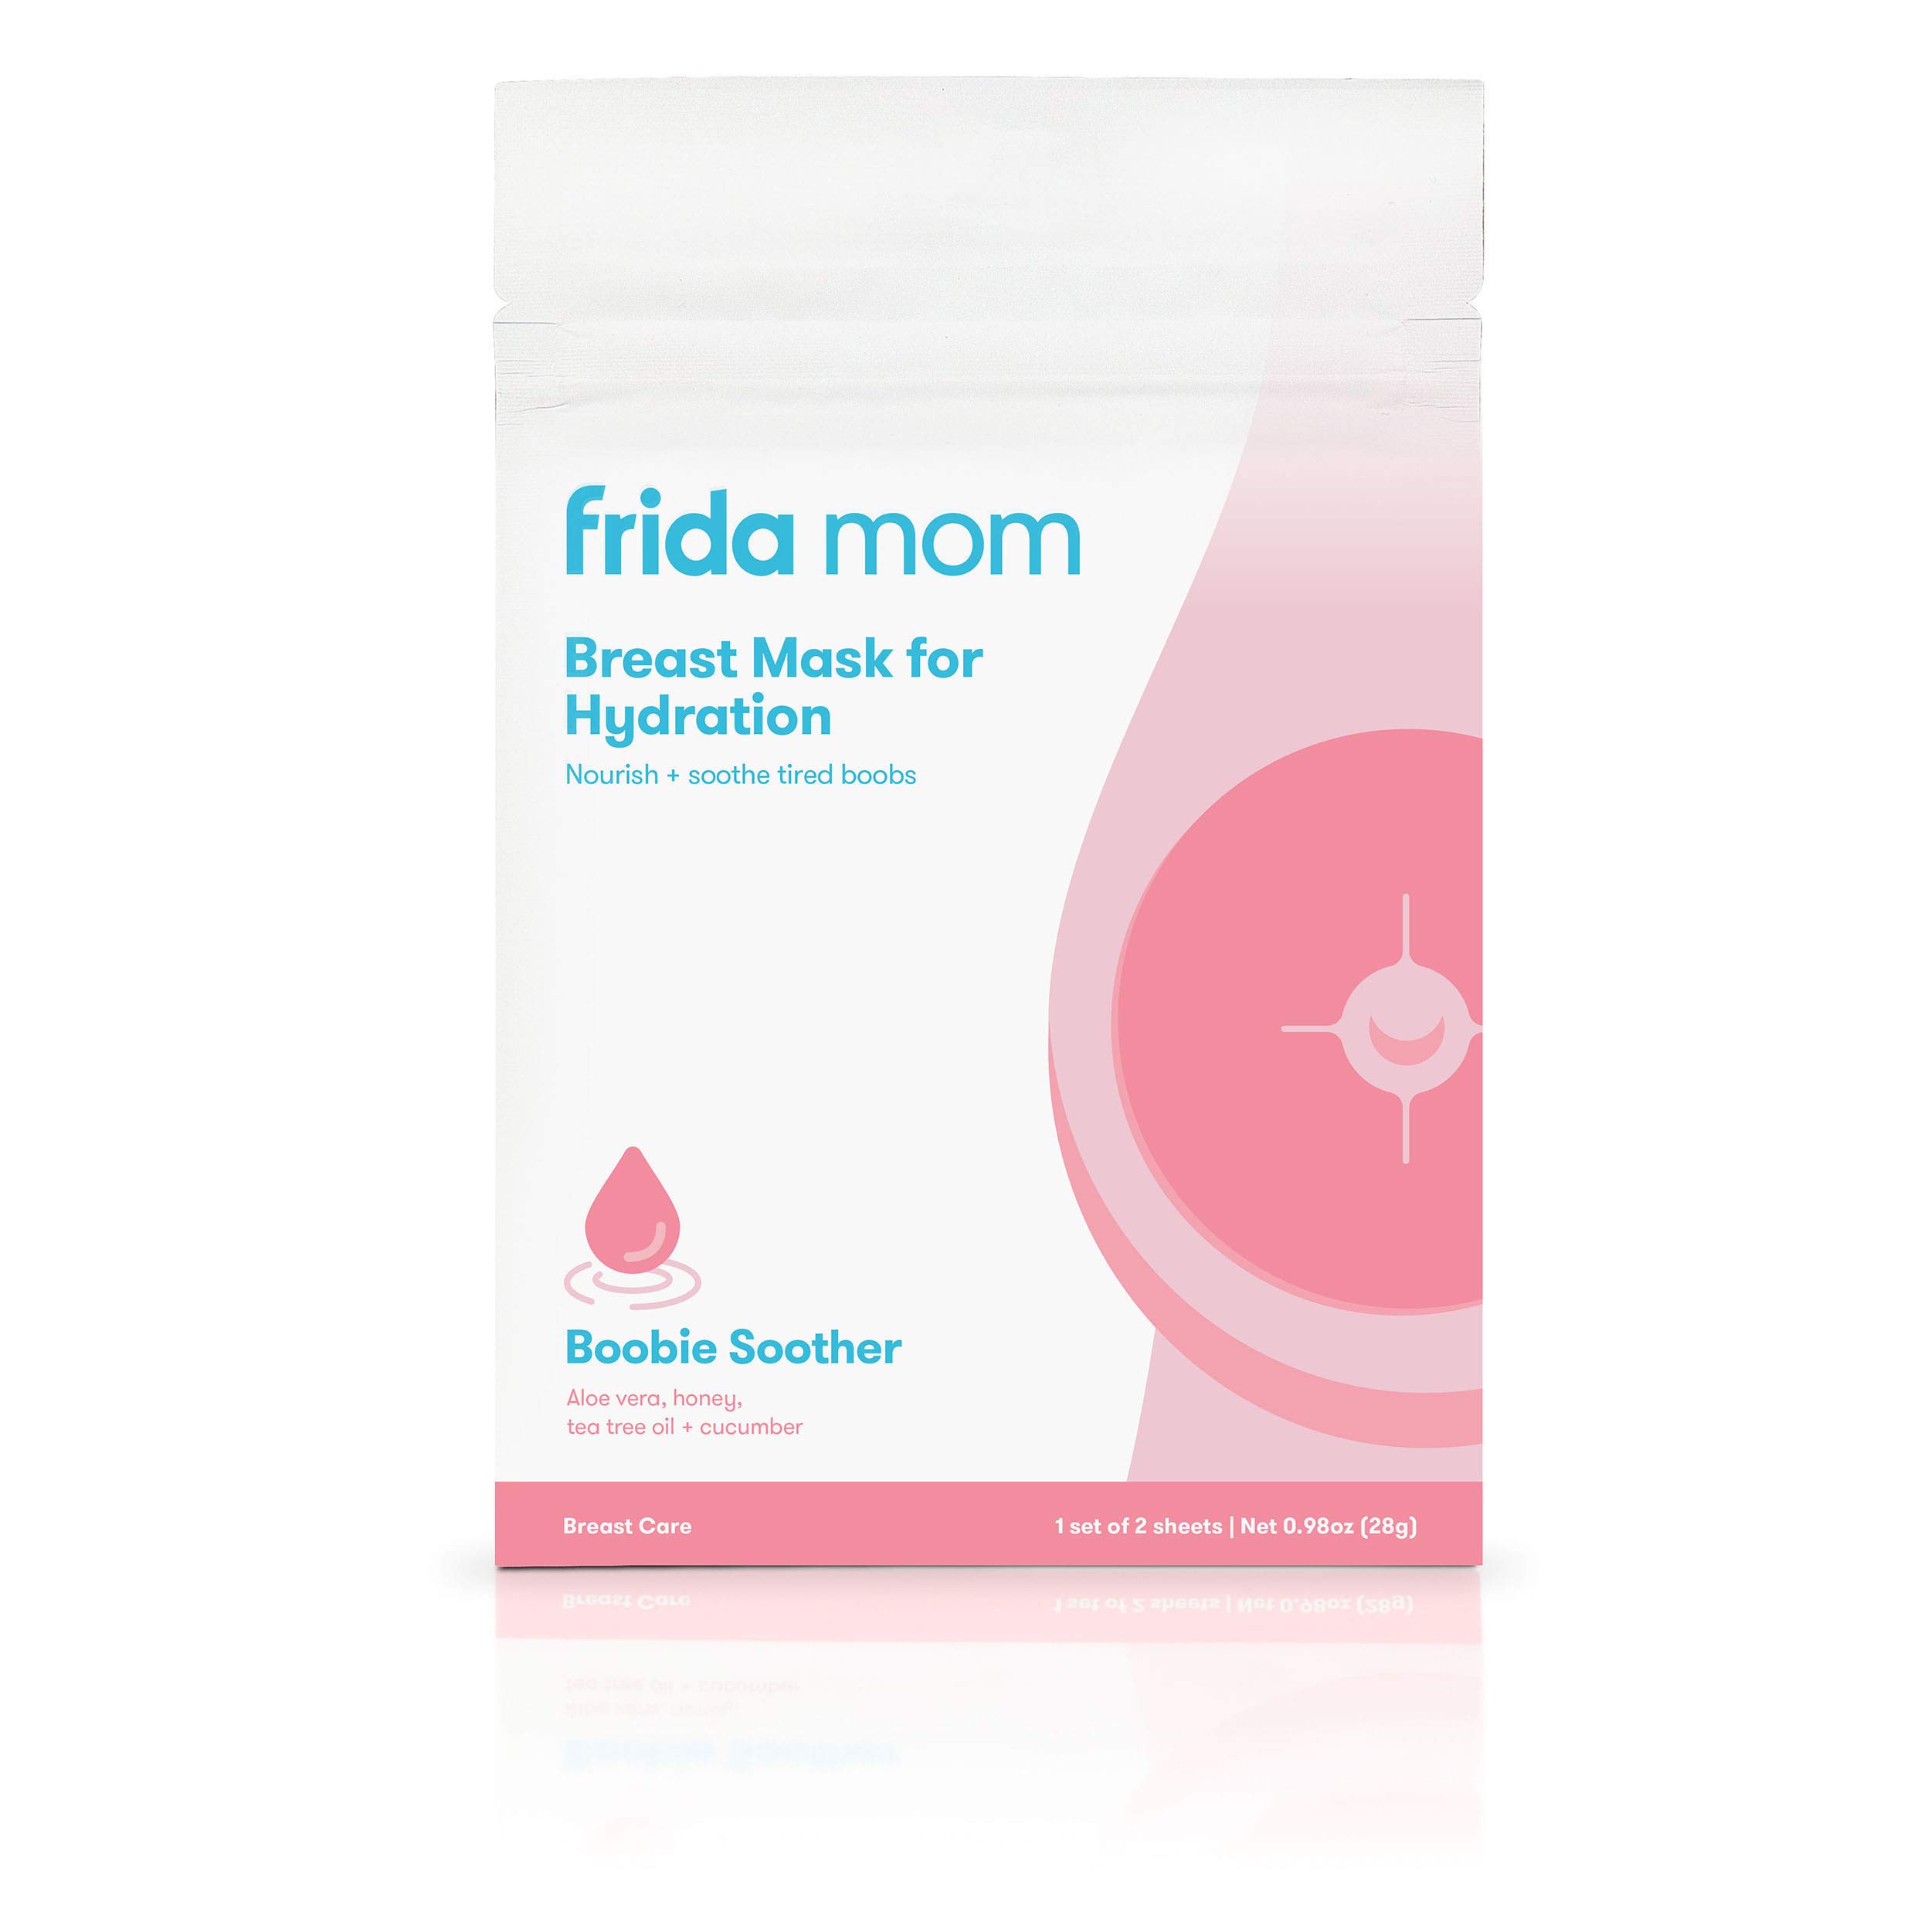 Frida Mom Breast Care Self Care Kit - 2-in-1 Lactation Massager, Instant Heat Breast Warmers, Breast Mask for Hydration, Breast Mask for Lactation - 9 Piece Set